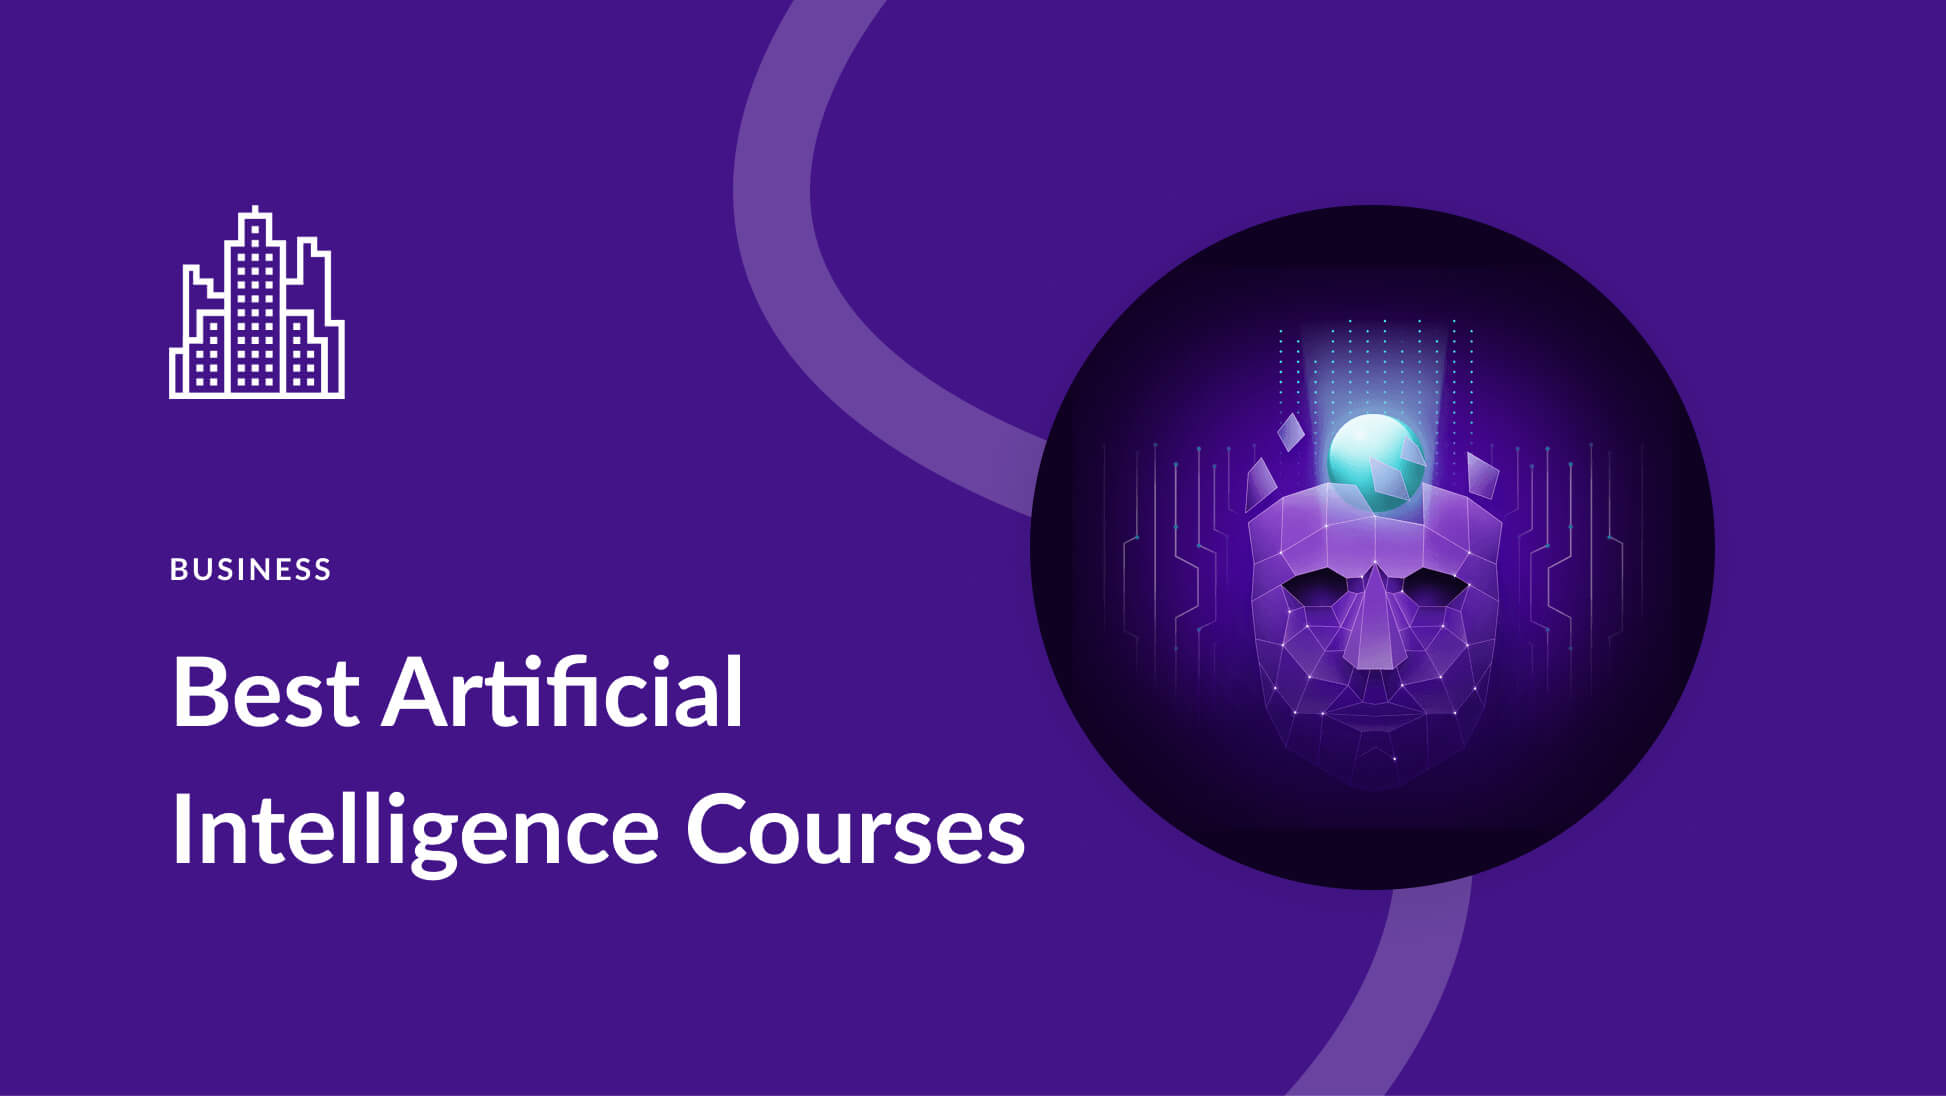 7 Best AI Courses To Take Online: Simple & Advanced (2023)